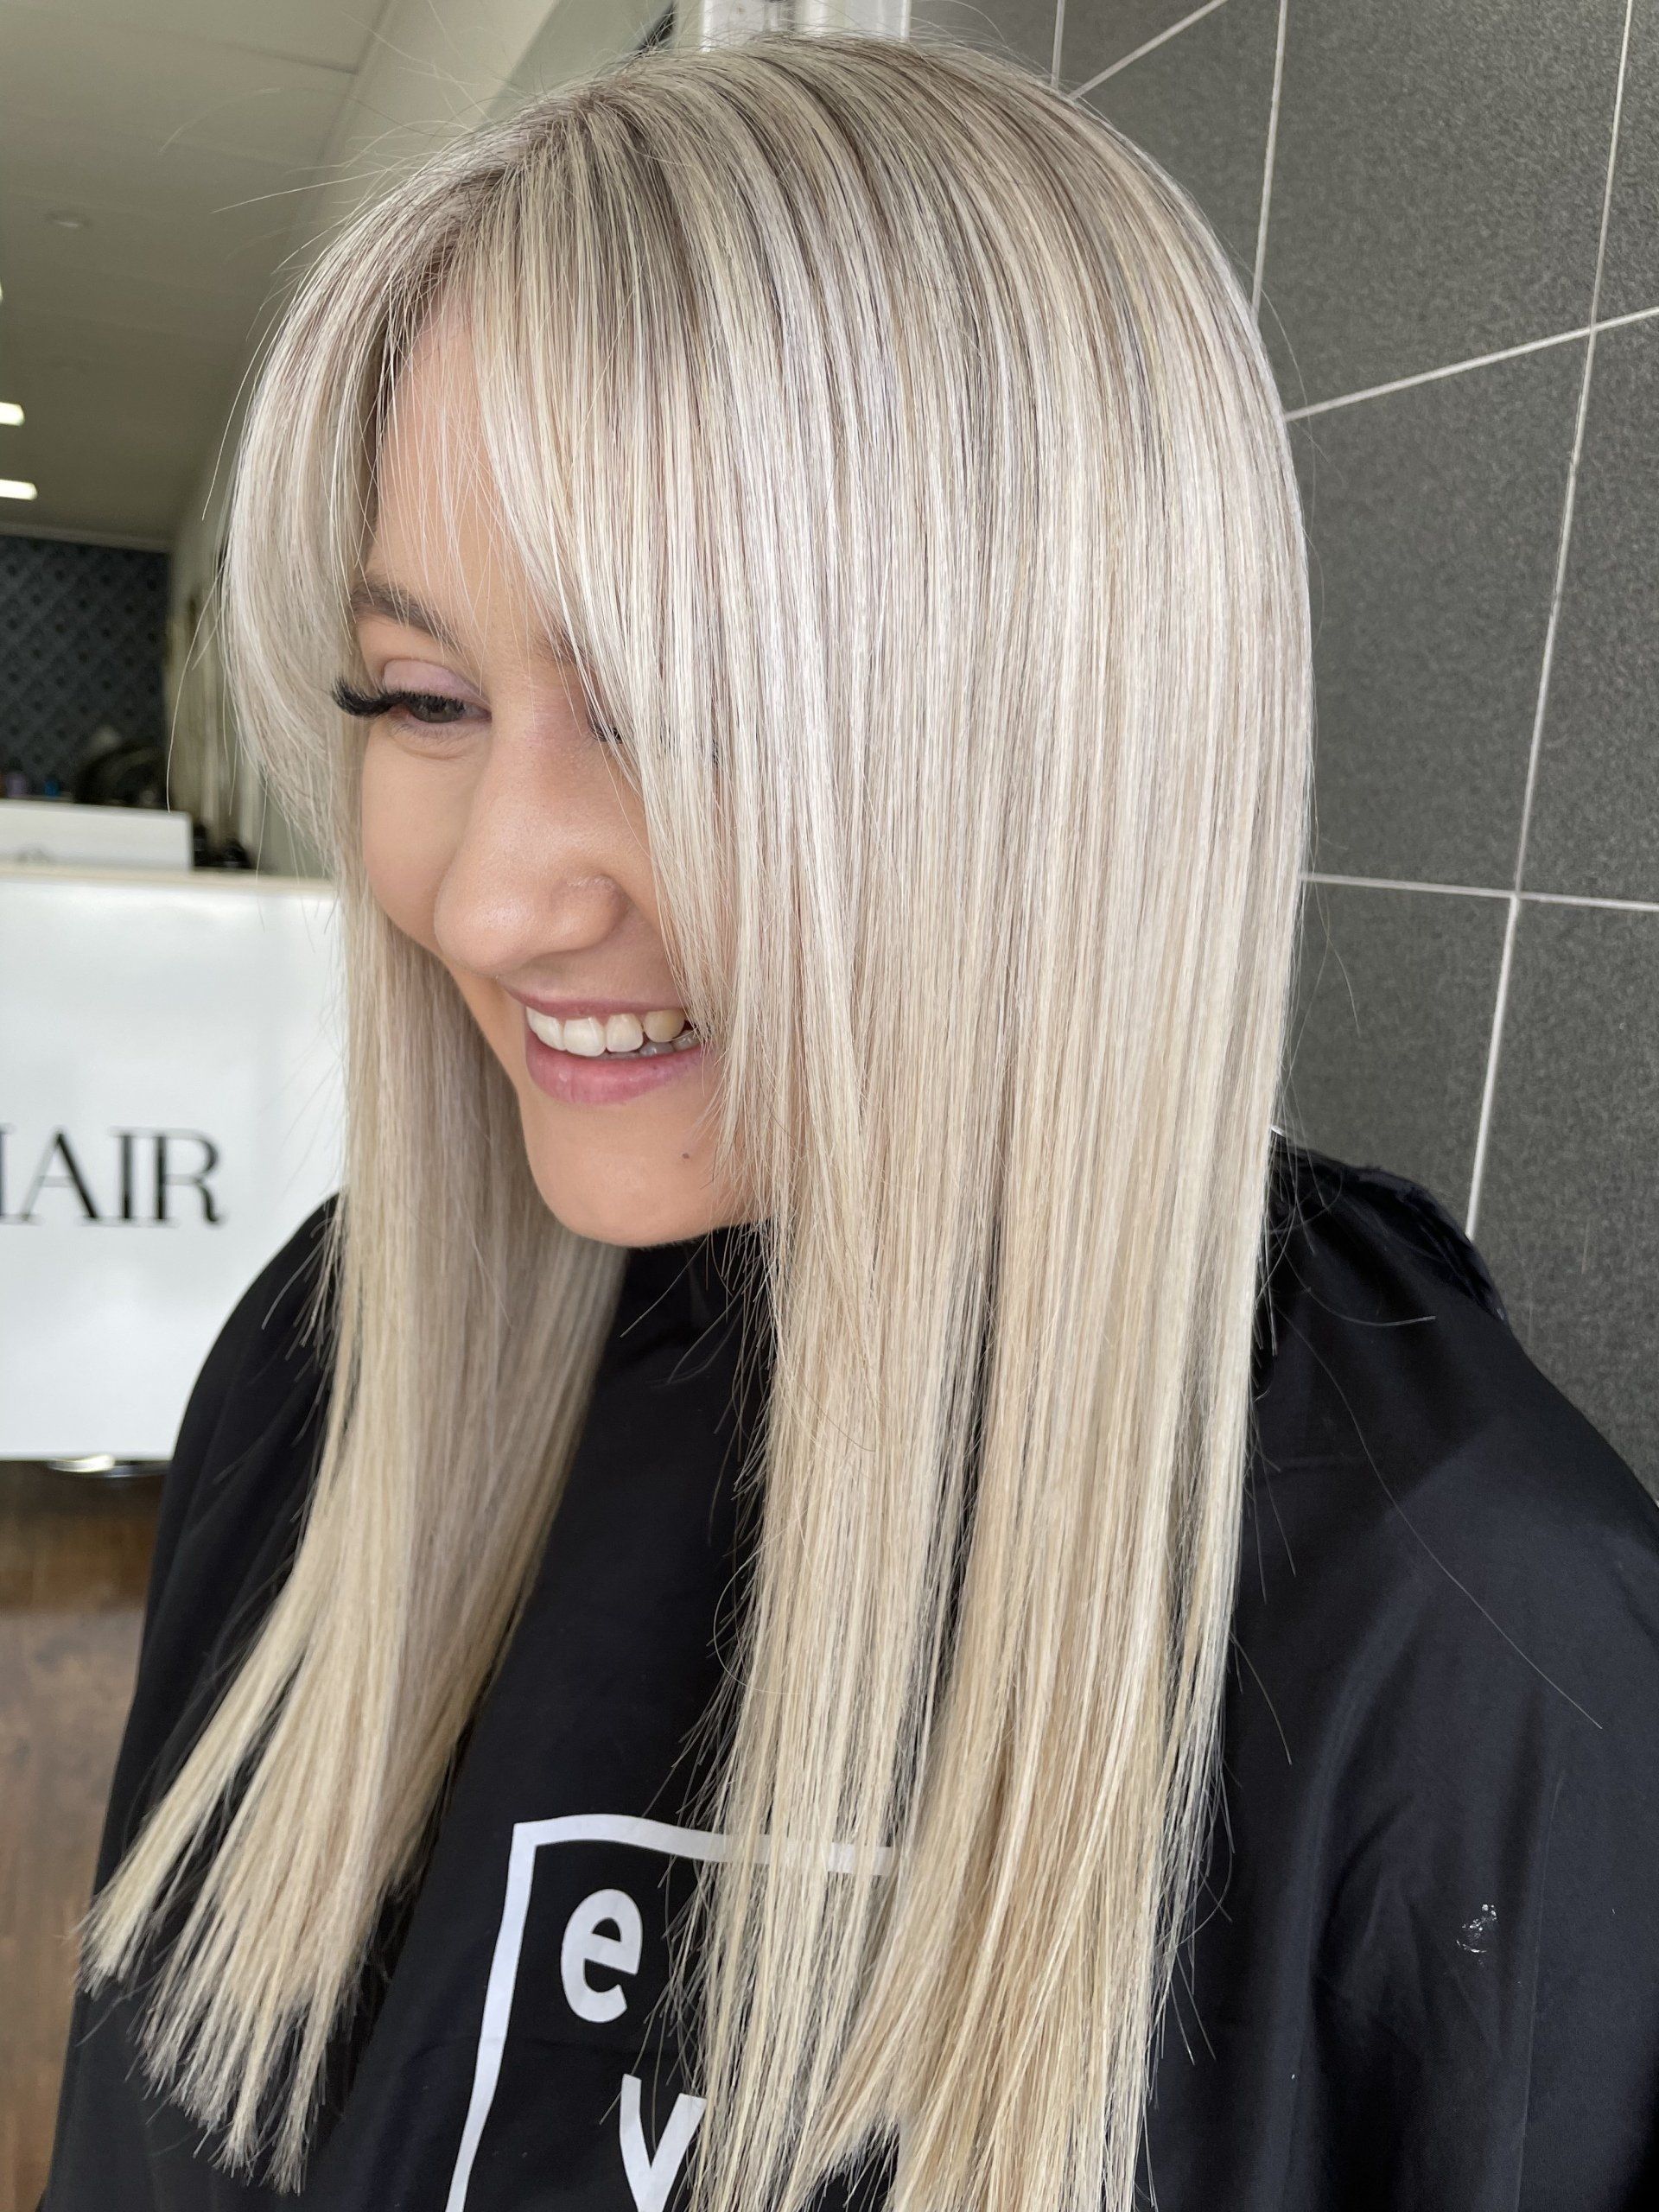 Woman With Blonde Dyed Hair — L.A Hair Design Ballina in Ballina, NSW